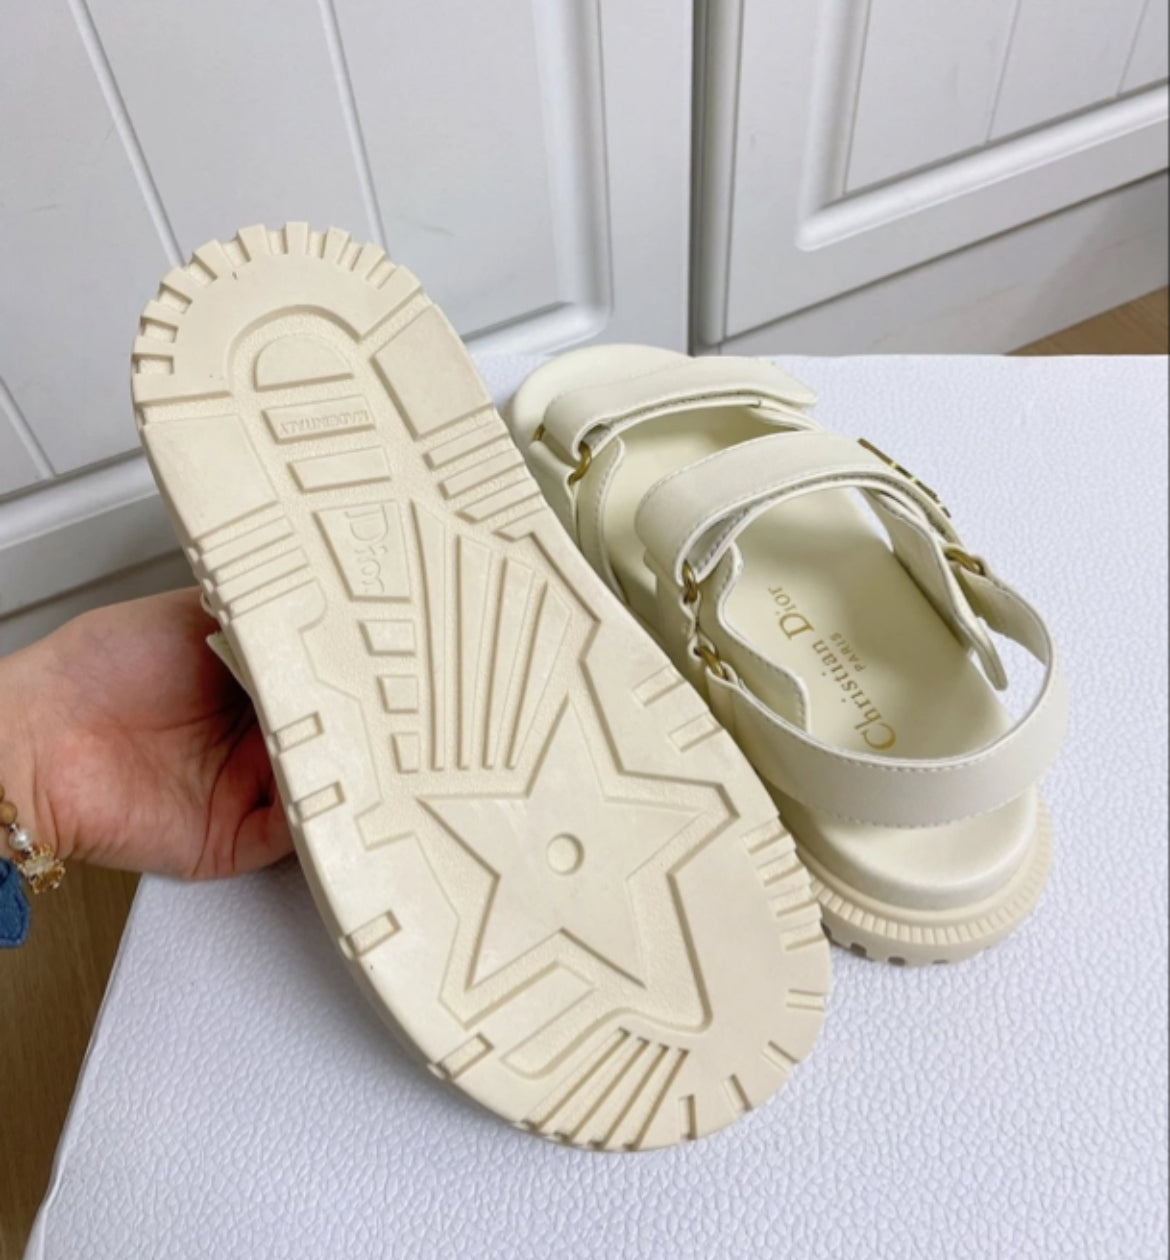 Christian Dior Dad Sandals White with Strap